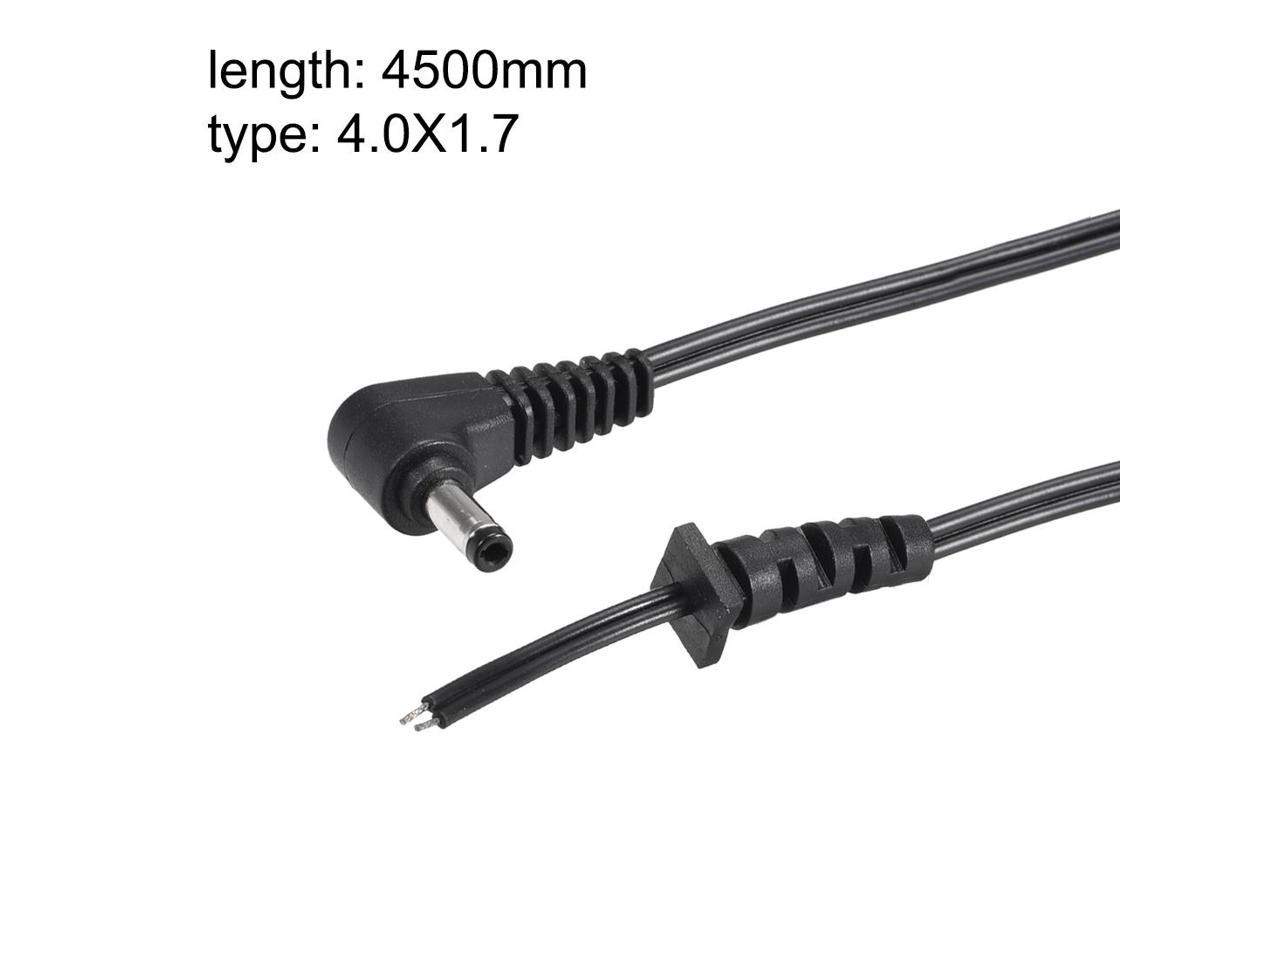 MALE 4.0mm x 1.7mm RIGHT ANGLE 90° DC Plug Cord Tinned Ends DIY REPAIR 